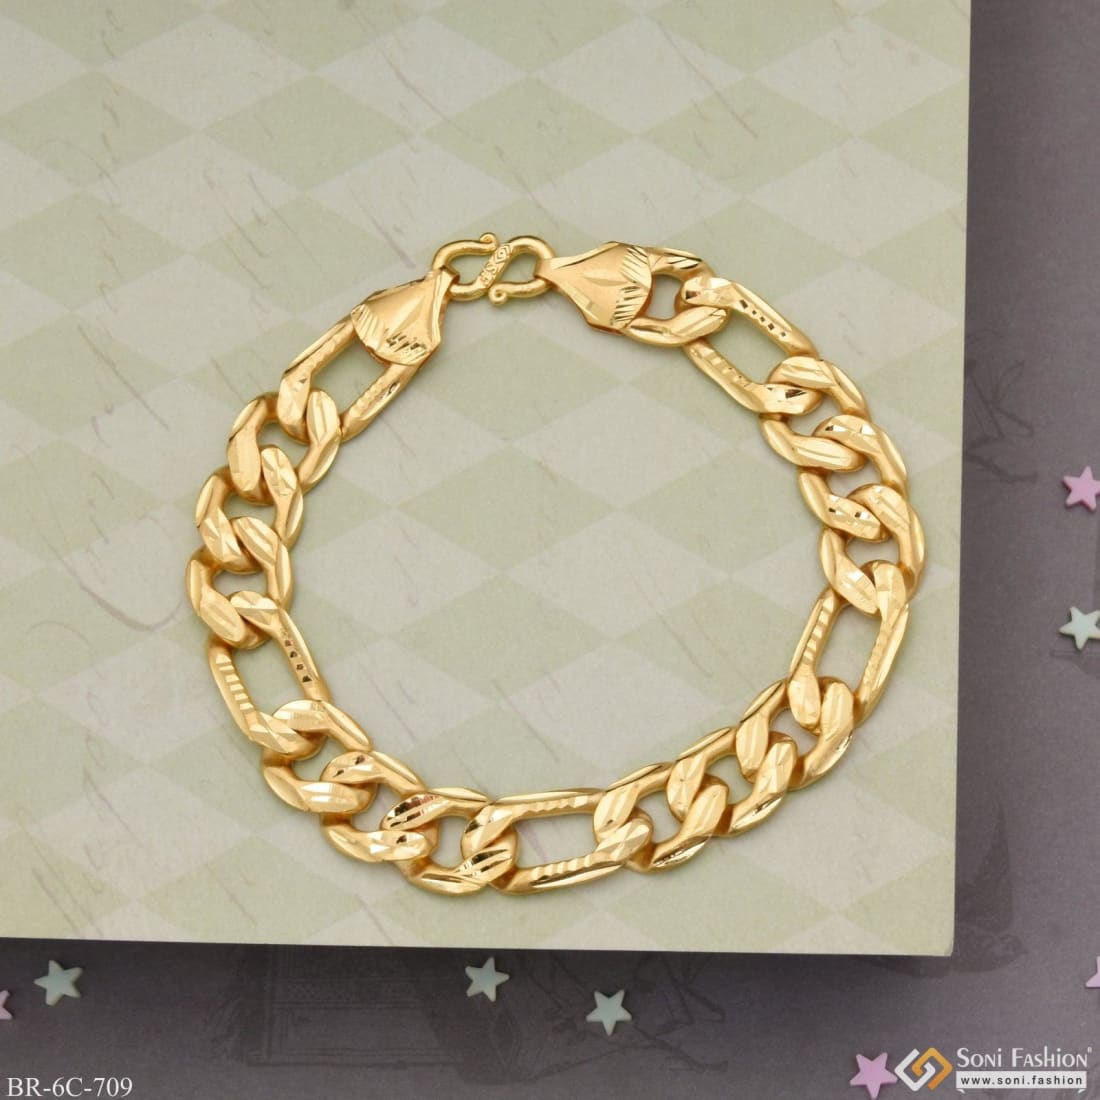 sachin best quality attractive design gold plated bracelet style c709 soni fashion